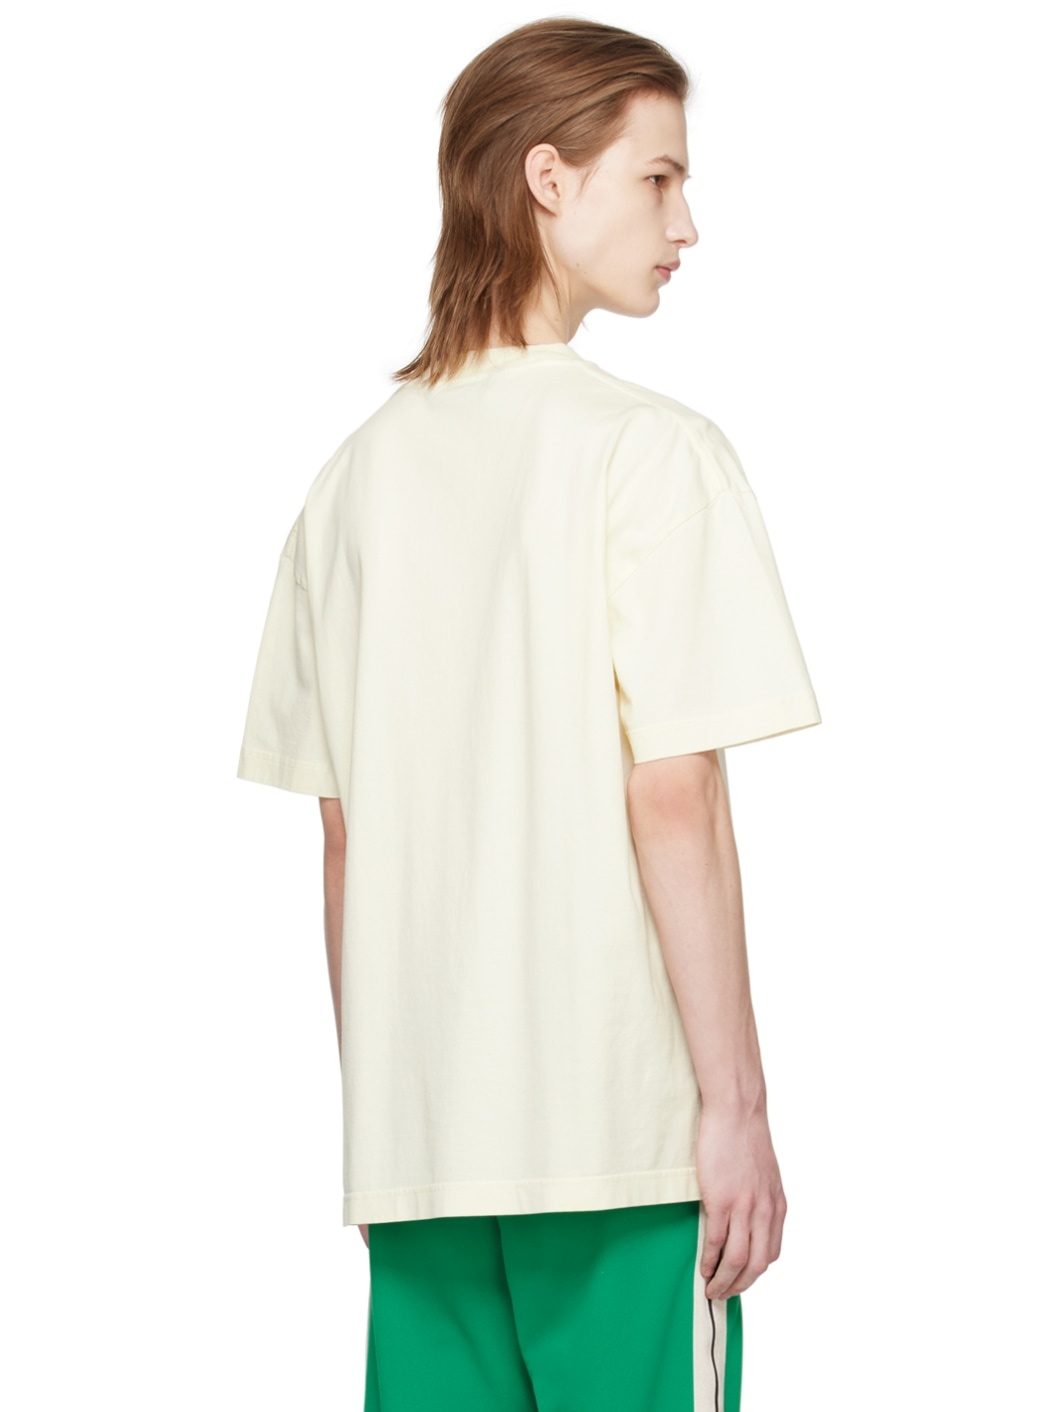 Off-White 'The Palm' T-Shirt - 3